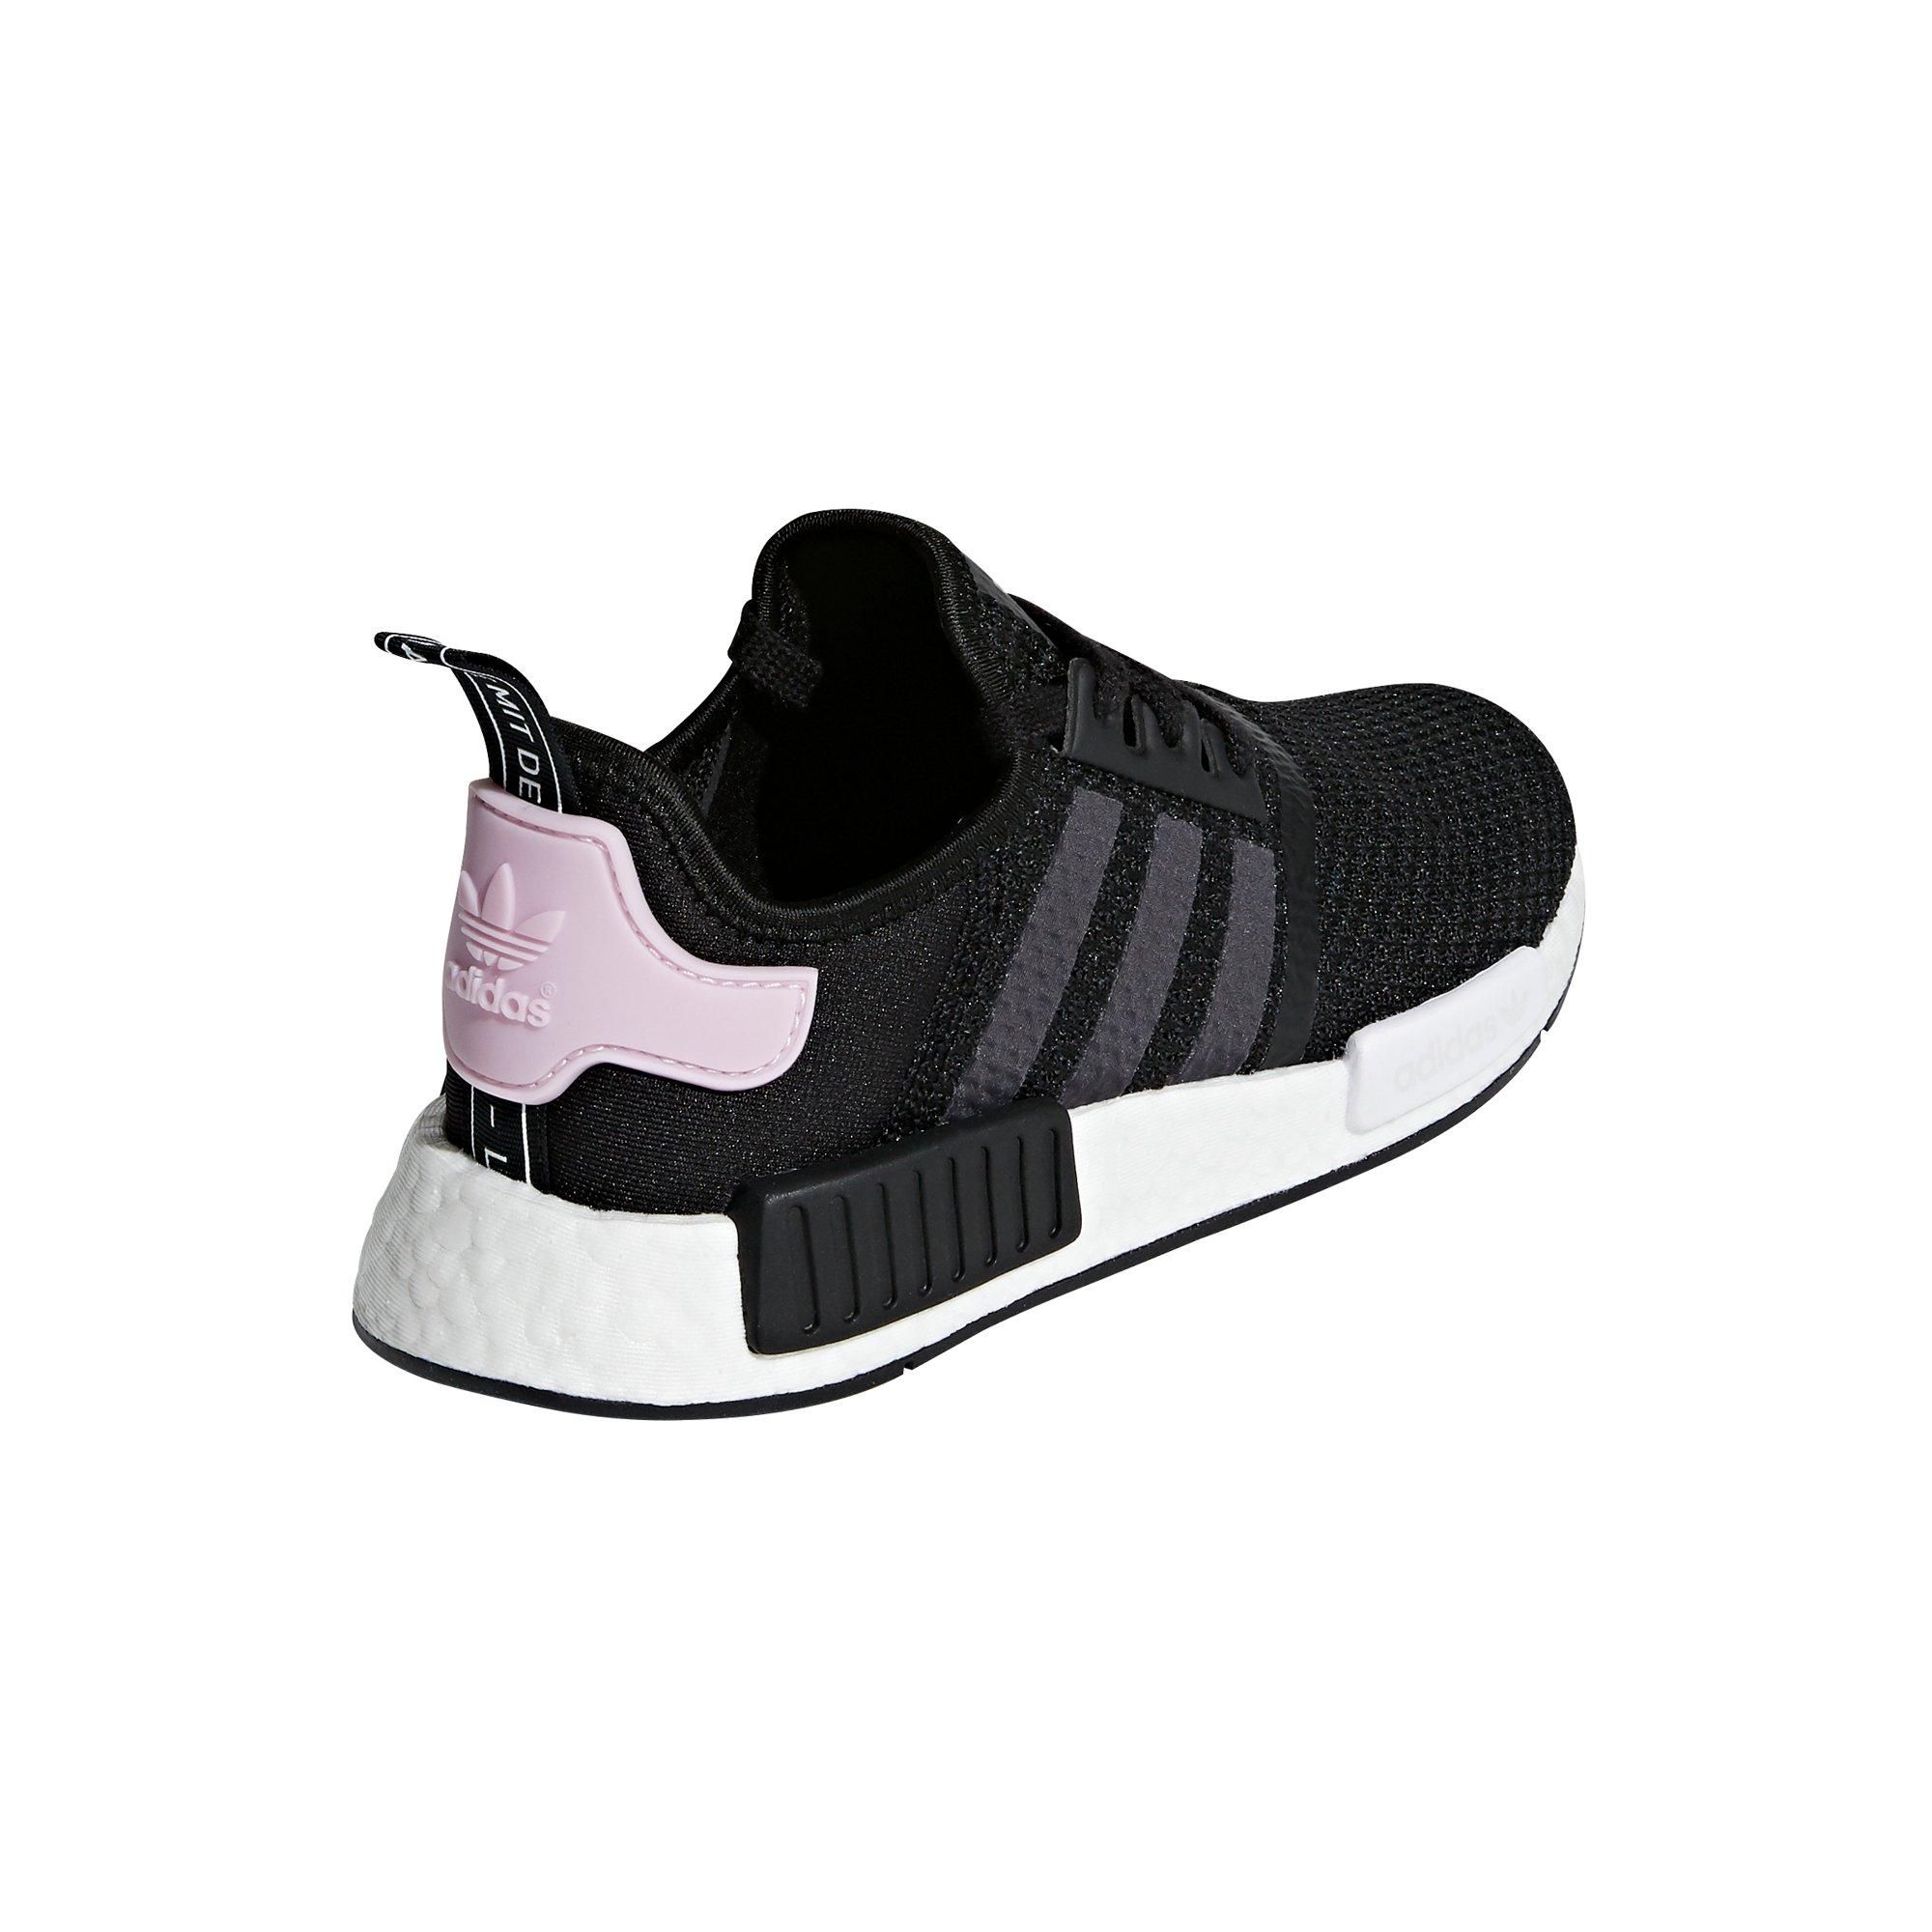 womens adidas nmd black and pink